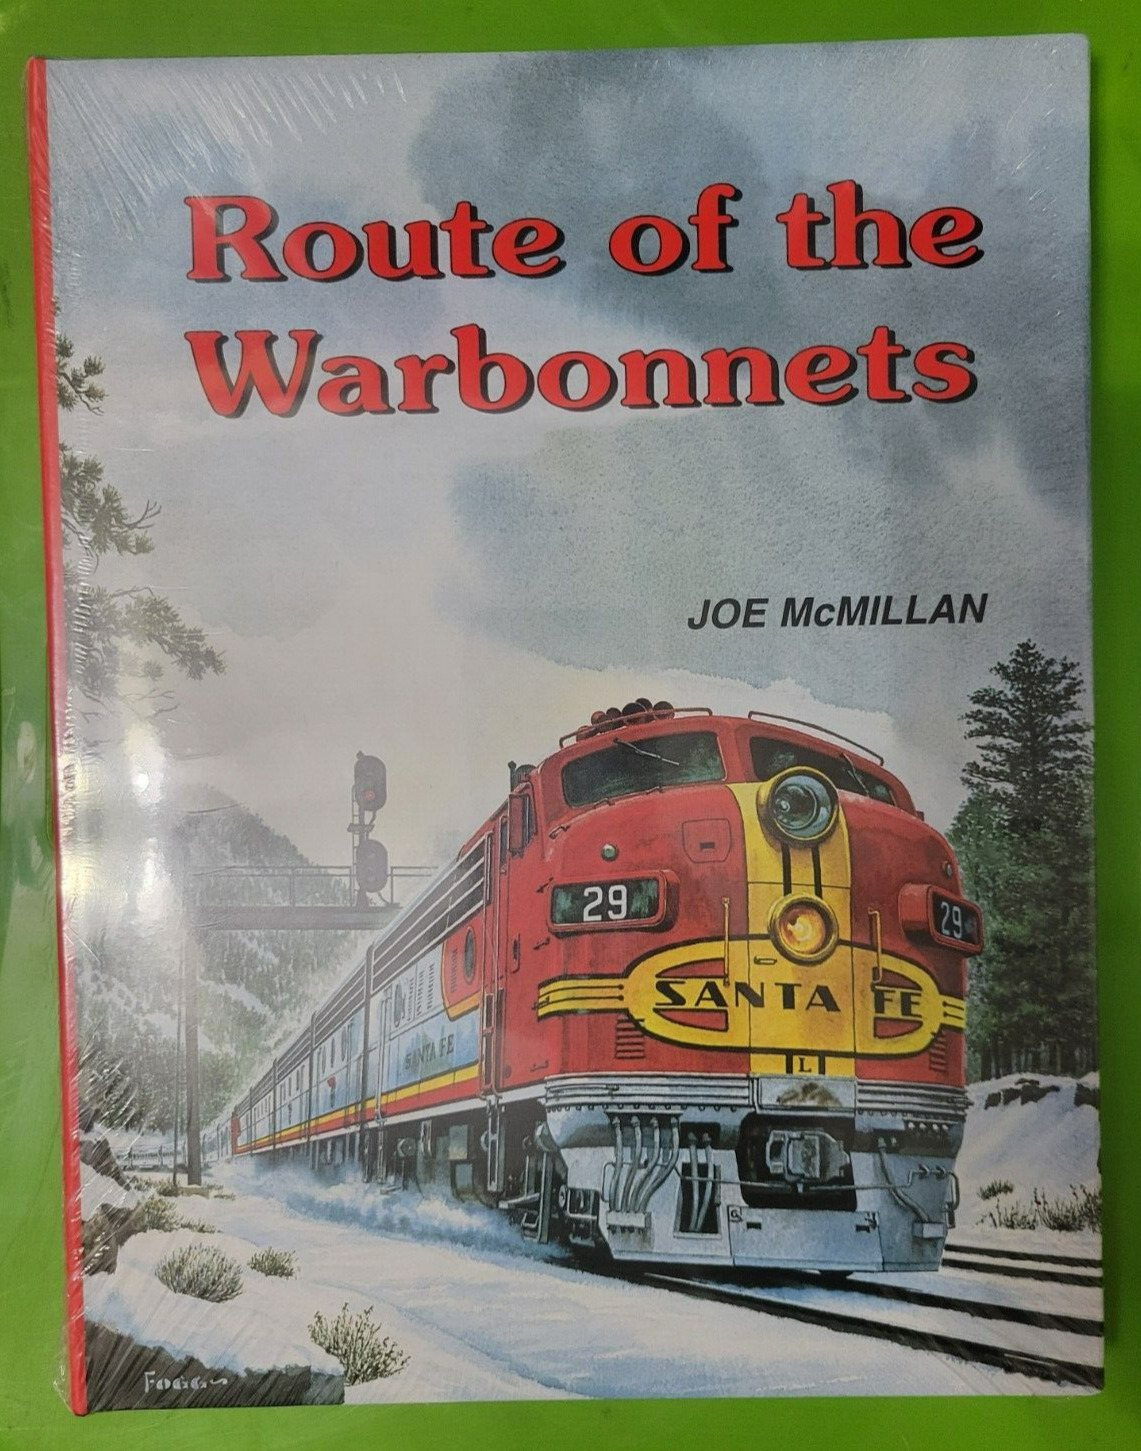 NEW SEALED COPY ROUTE OF THE WARBONNETS JOE MCMILLAN